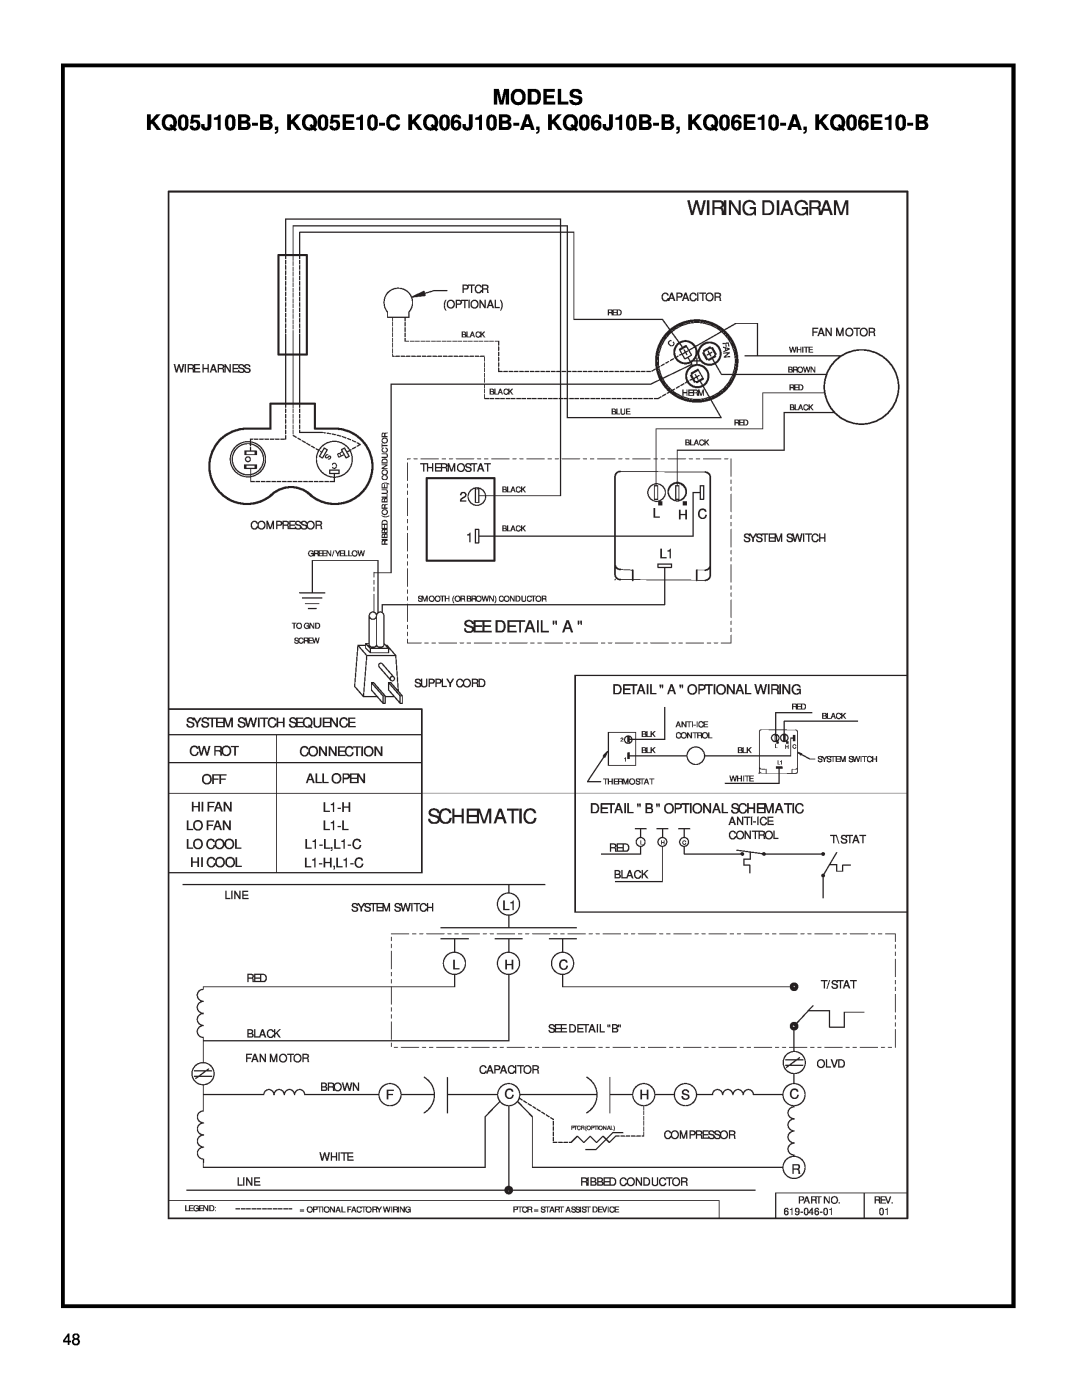 Friedrich racservmn service manual Wiring Diagram, Models, See Detail A, Schematic 